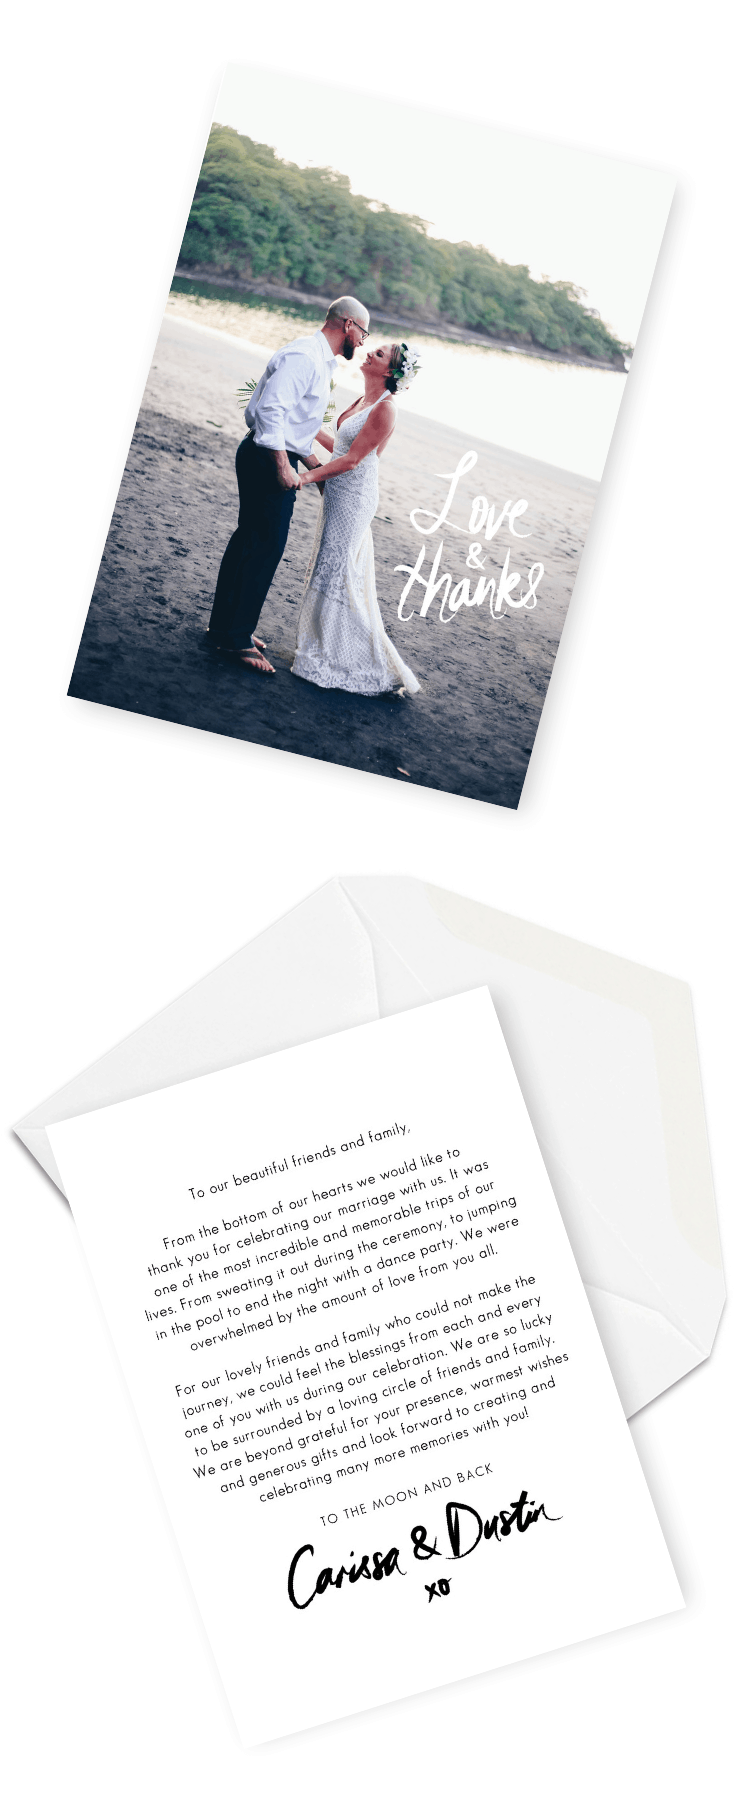 Wedding Thank You Cards Message Examples Wording Ideas for Your Wedding Thank You Cards